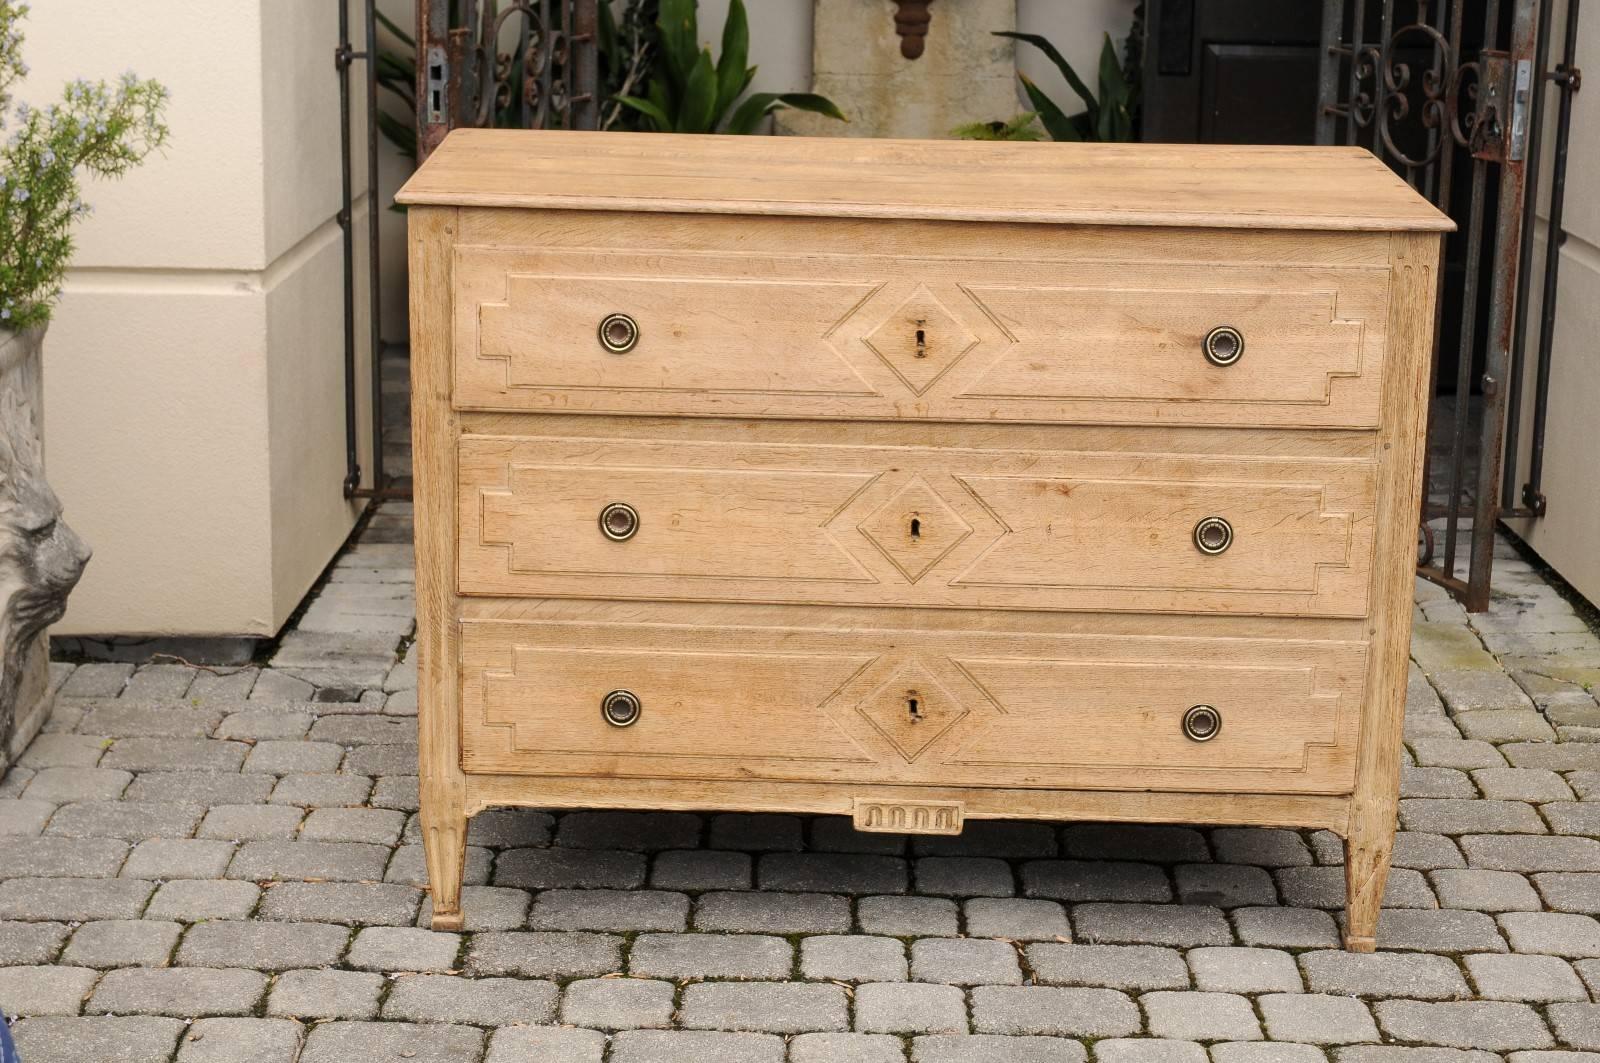 A French bleached oak neoclassical style three-drawer commode with diamond motifs from the mid-19th century. This French oak commode features a rectangular planked top sitting above three drawers with geometrical motifs carved in low-relief. Two